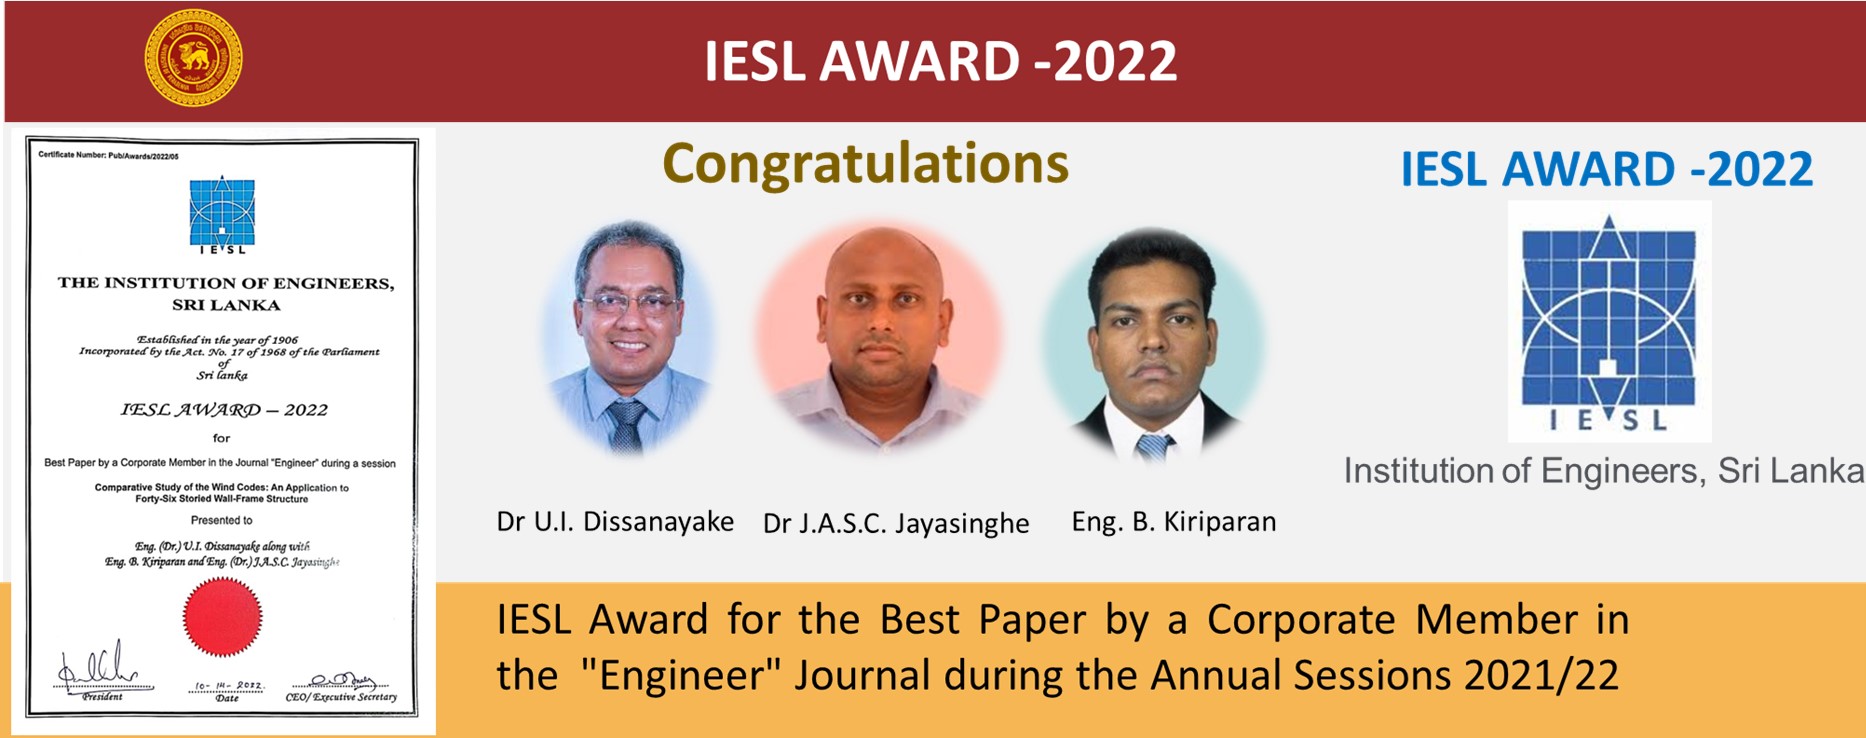 IESL AWARD - 2022 for Best Paper - during the session 2021/22- Comparative Study of the Wind Codes: An Application to Forty-Six Storied Wall-Frame Structure